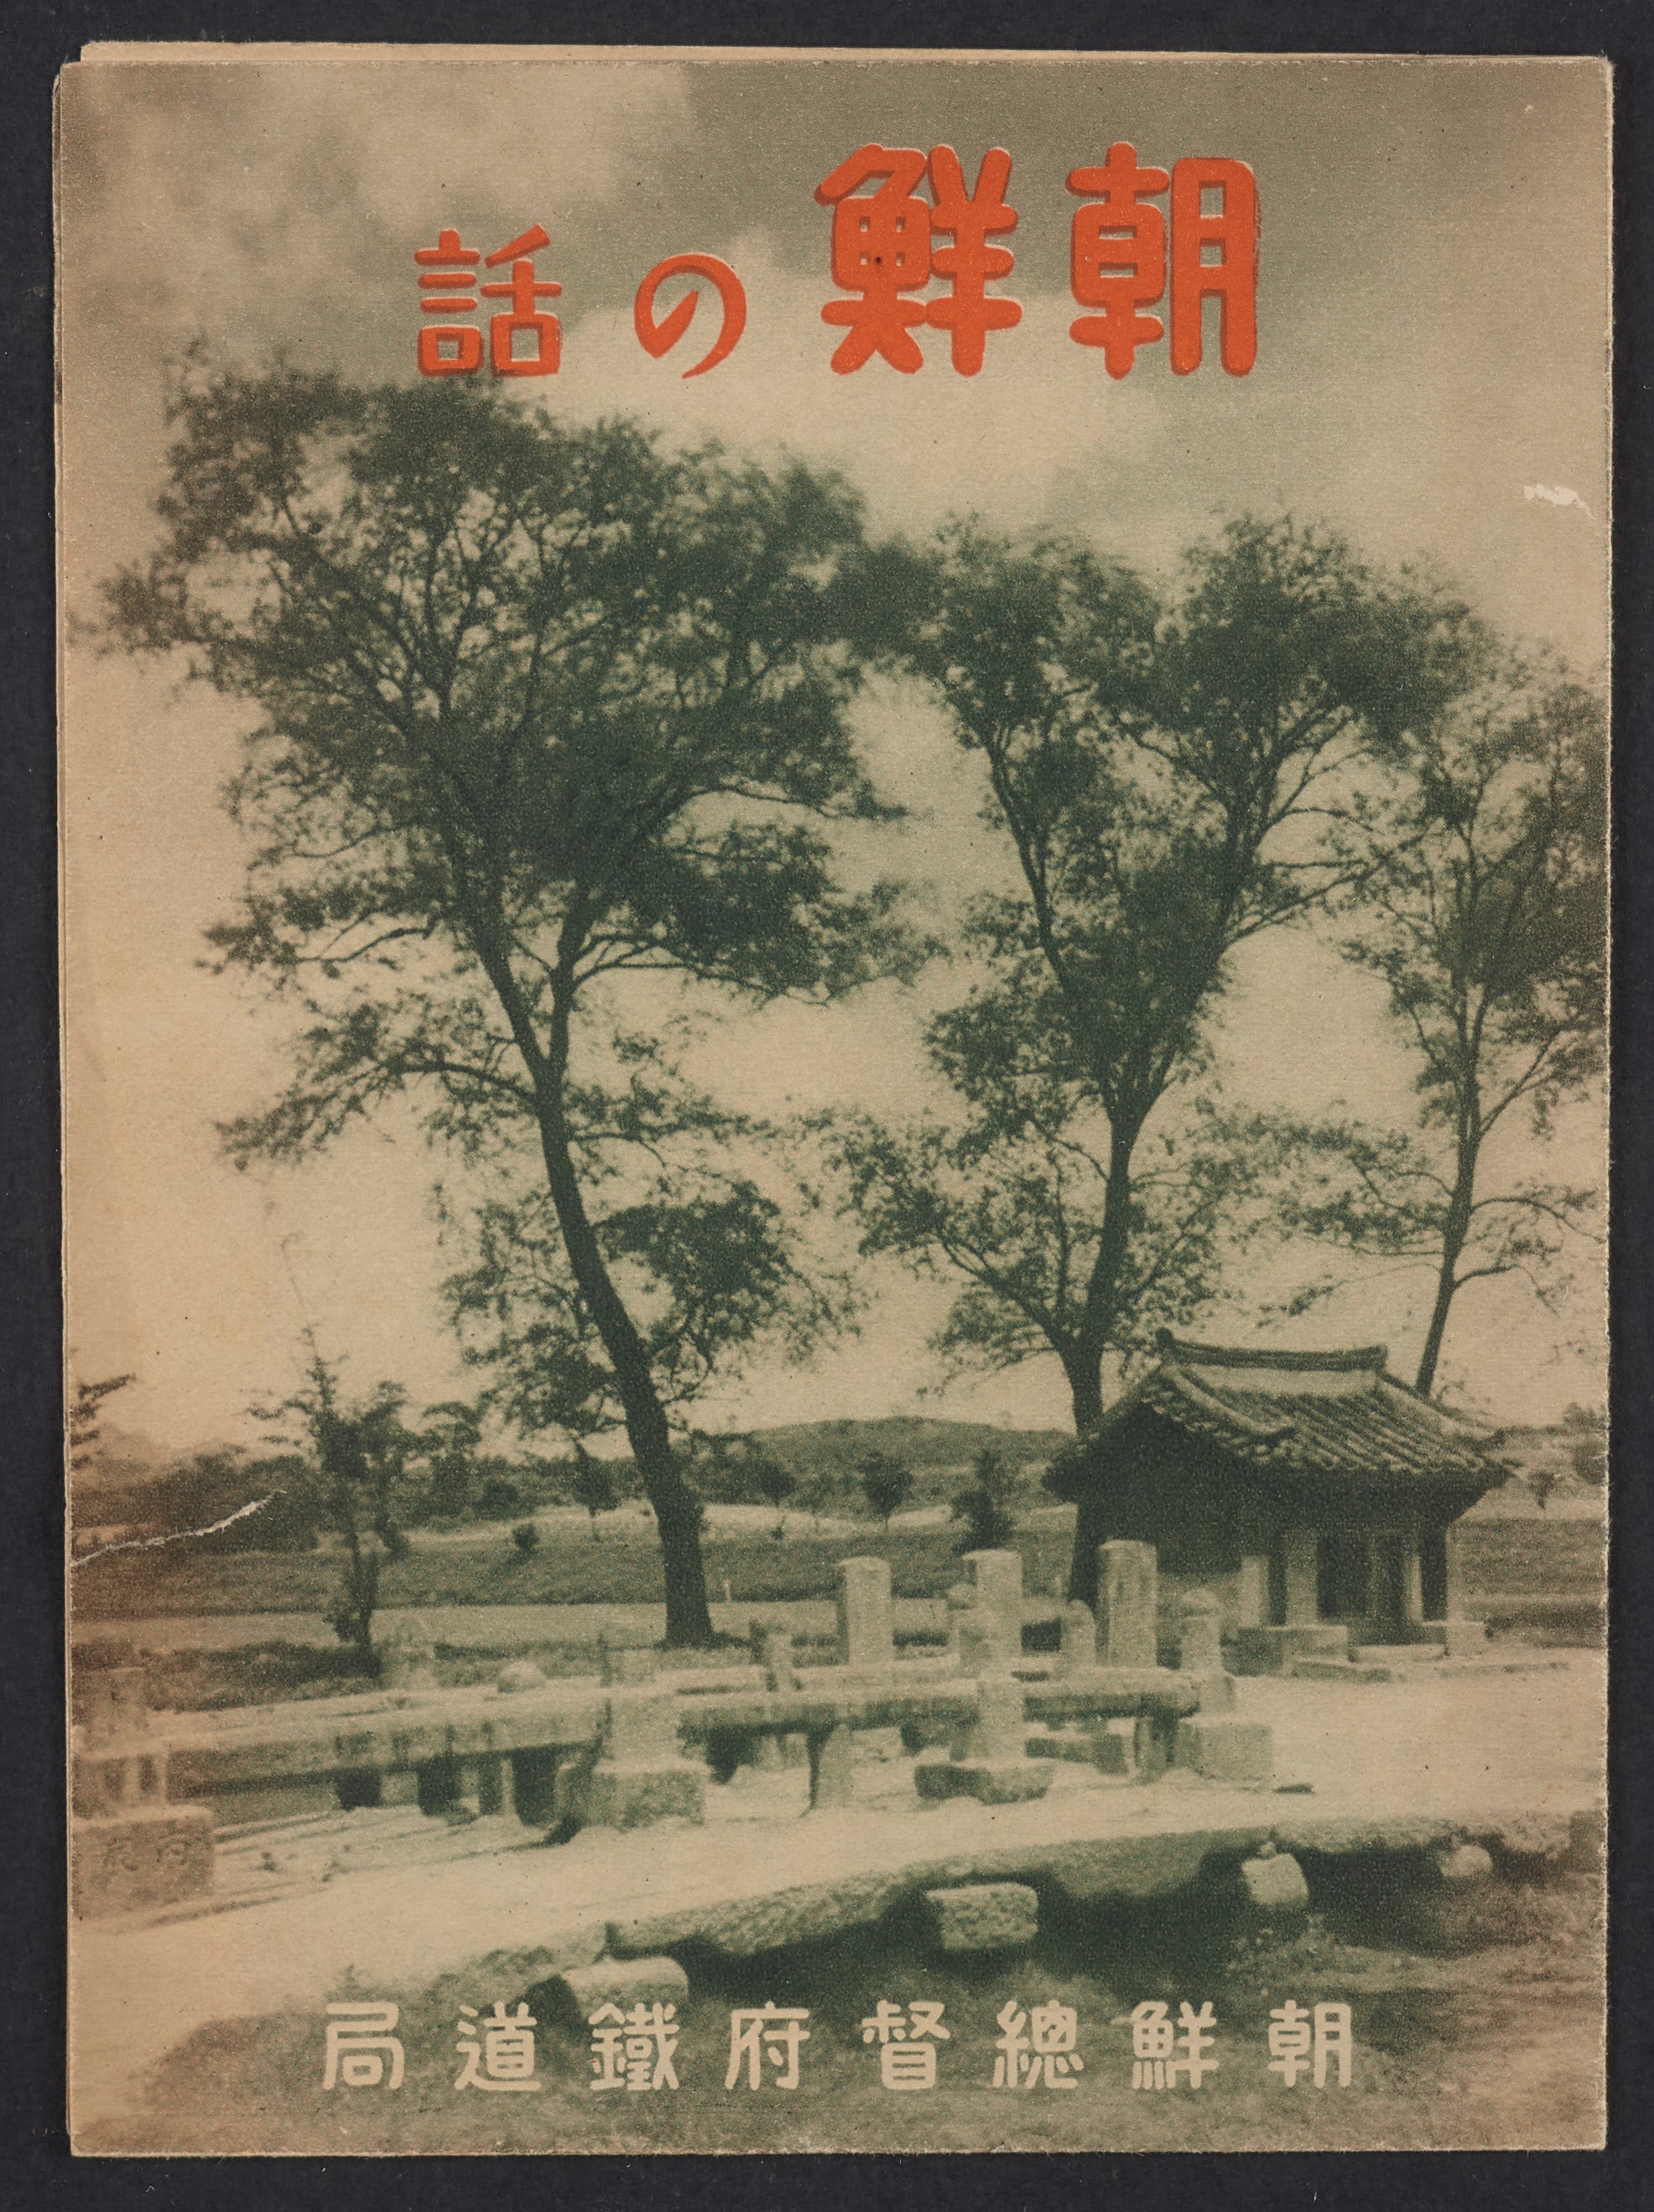 A book cover in sepia shows tall trees over a hut.